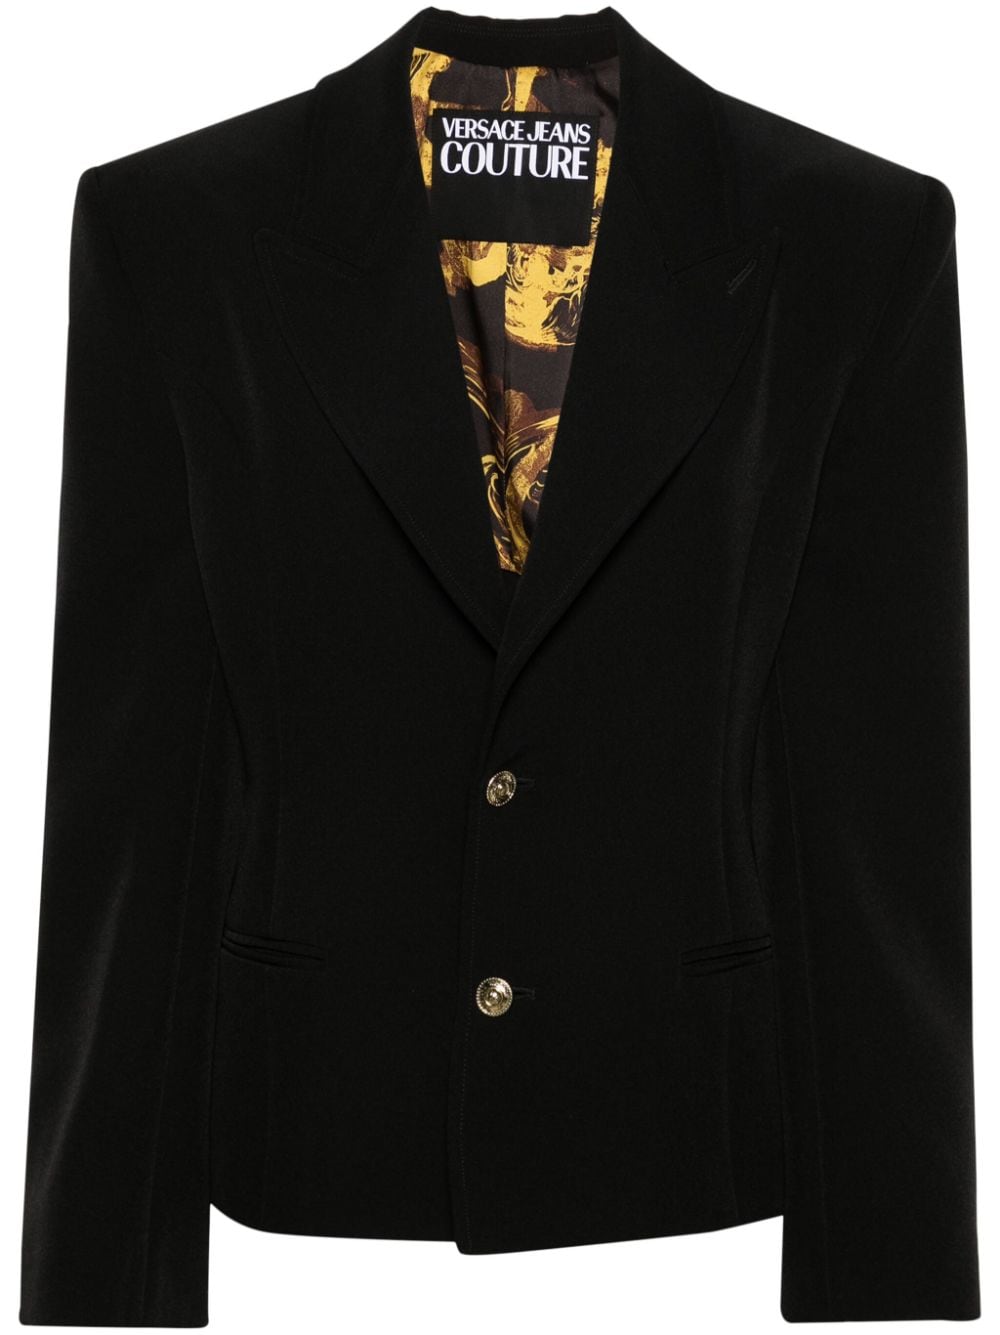 Versace Jeans Couture lace-up single-breasted blazer - Black von Versace Jeans Couture